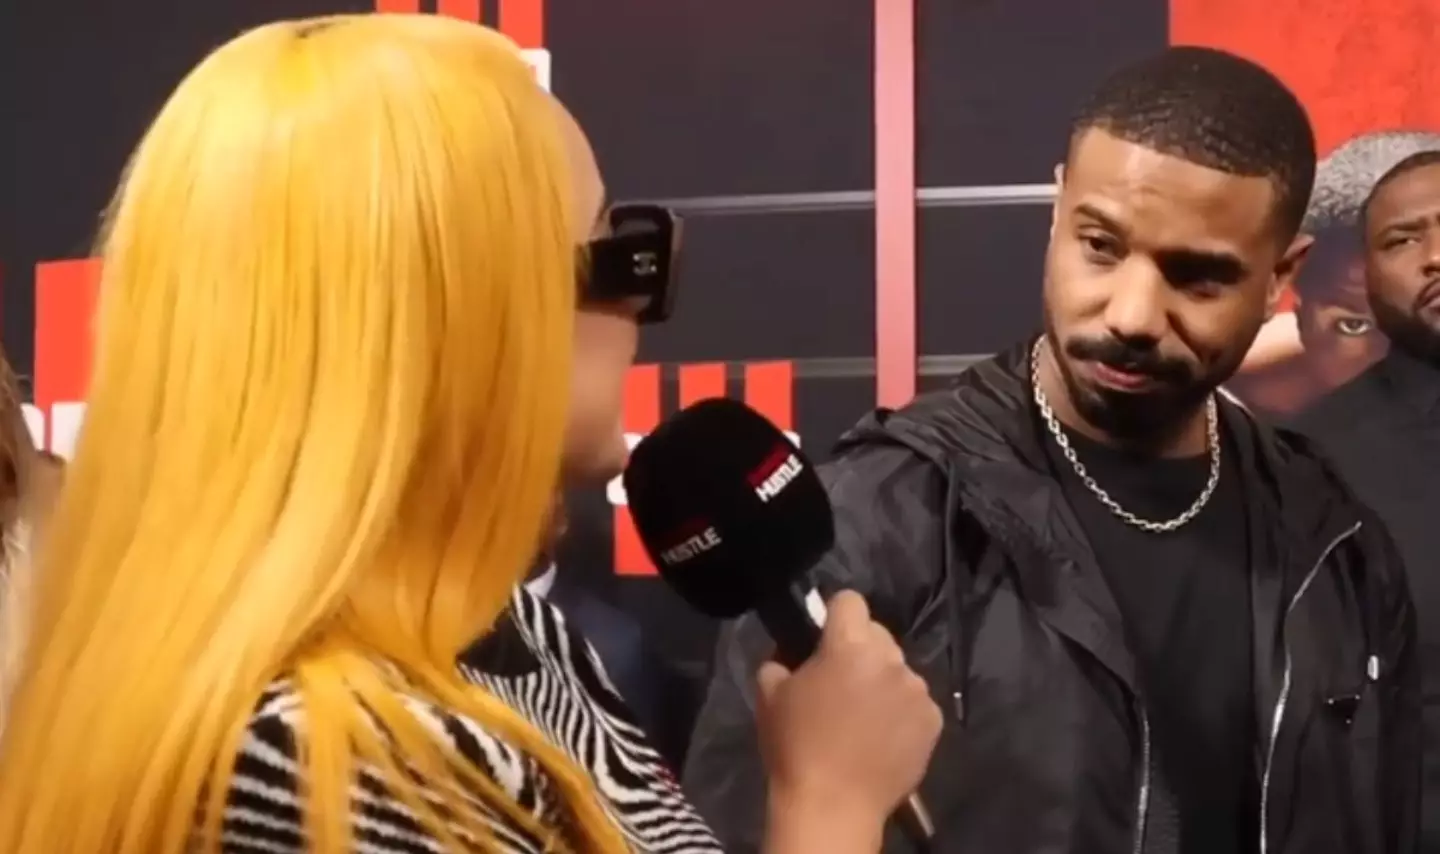 Michael B. Jordan claimed the reporter had previously called him 'corny'. (The Morning Hustle)